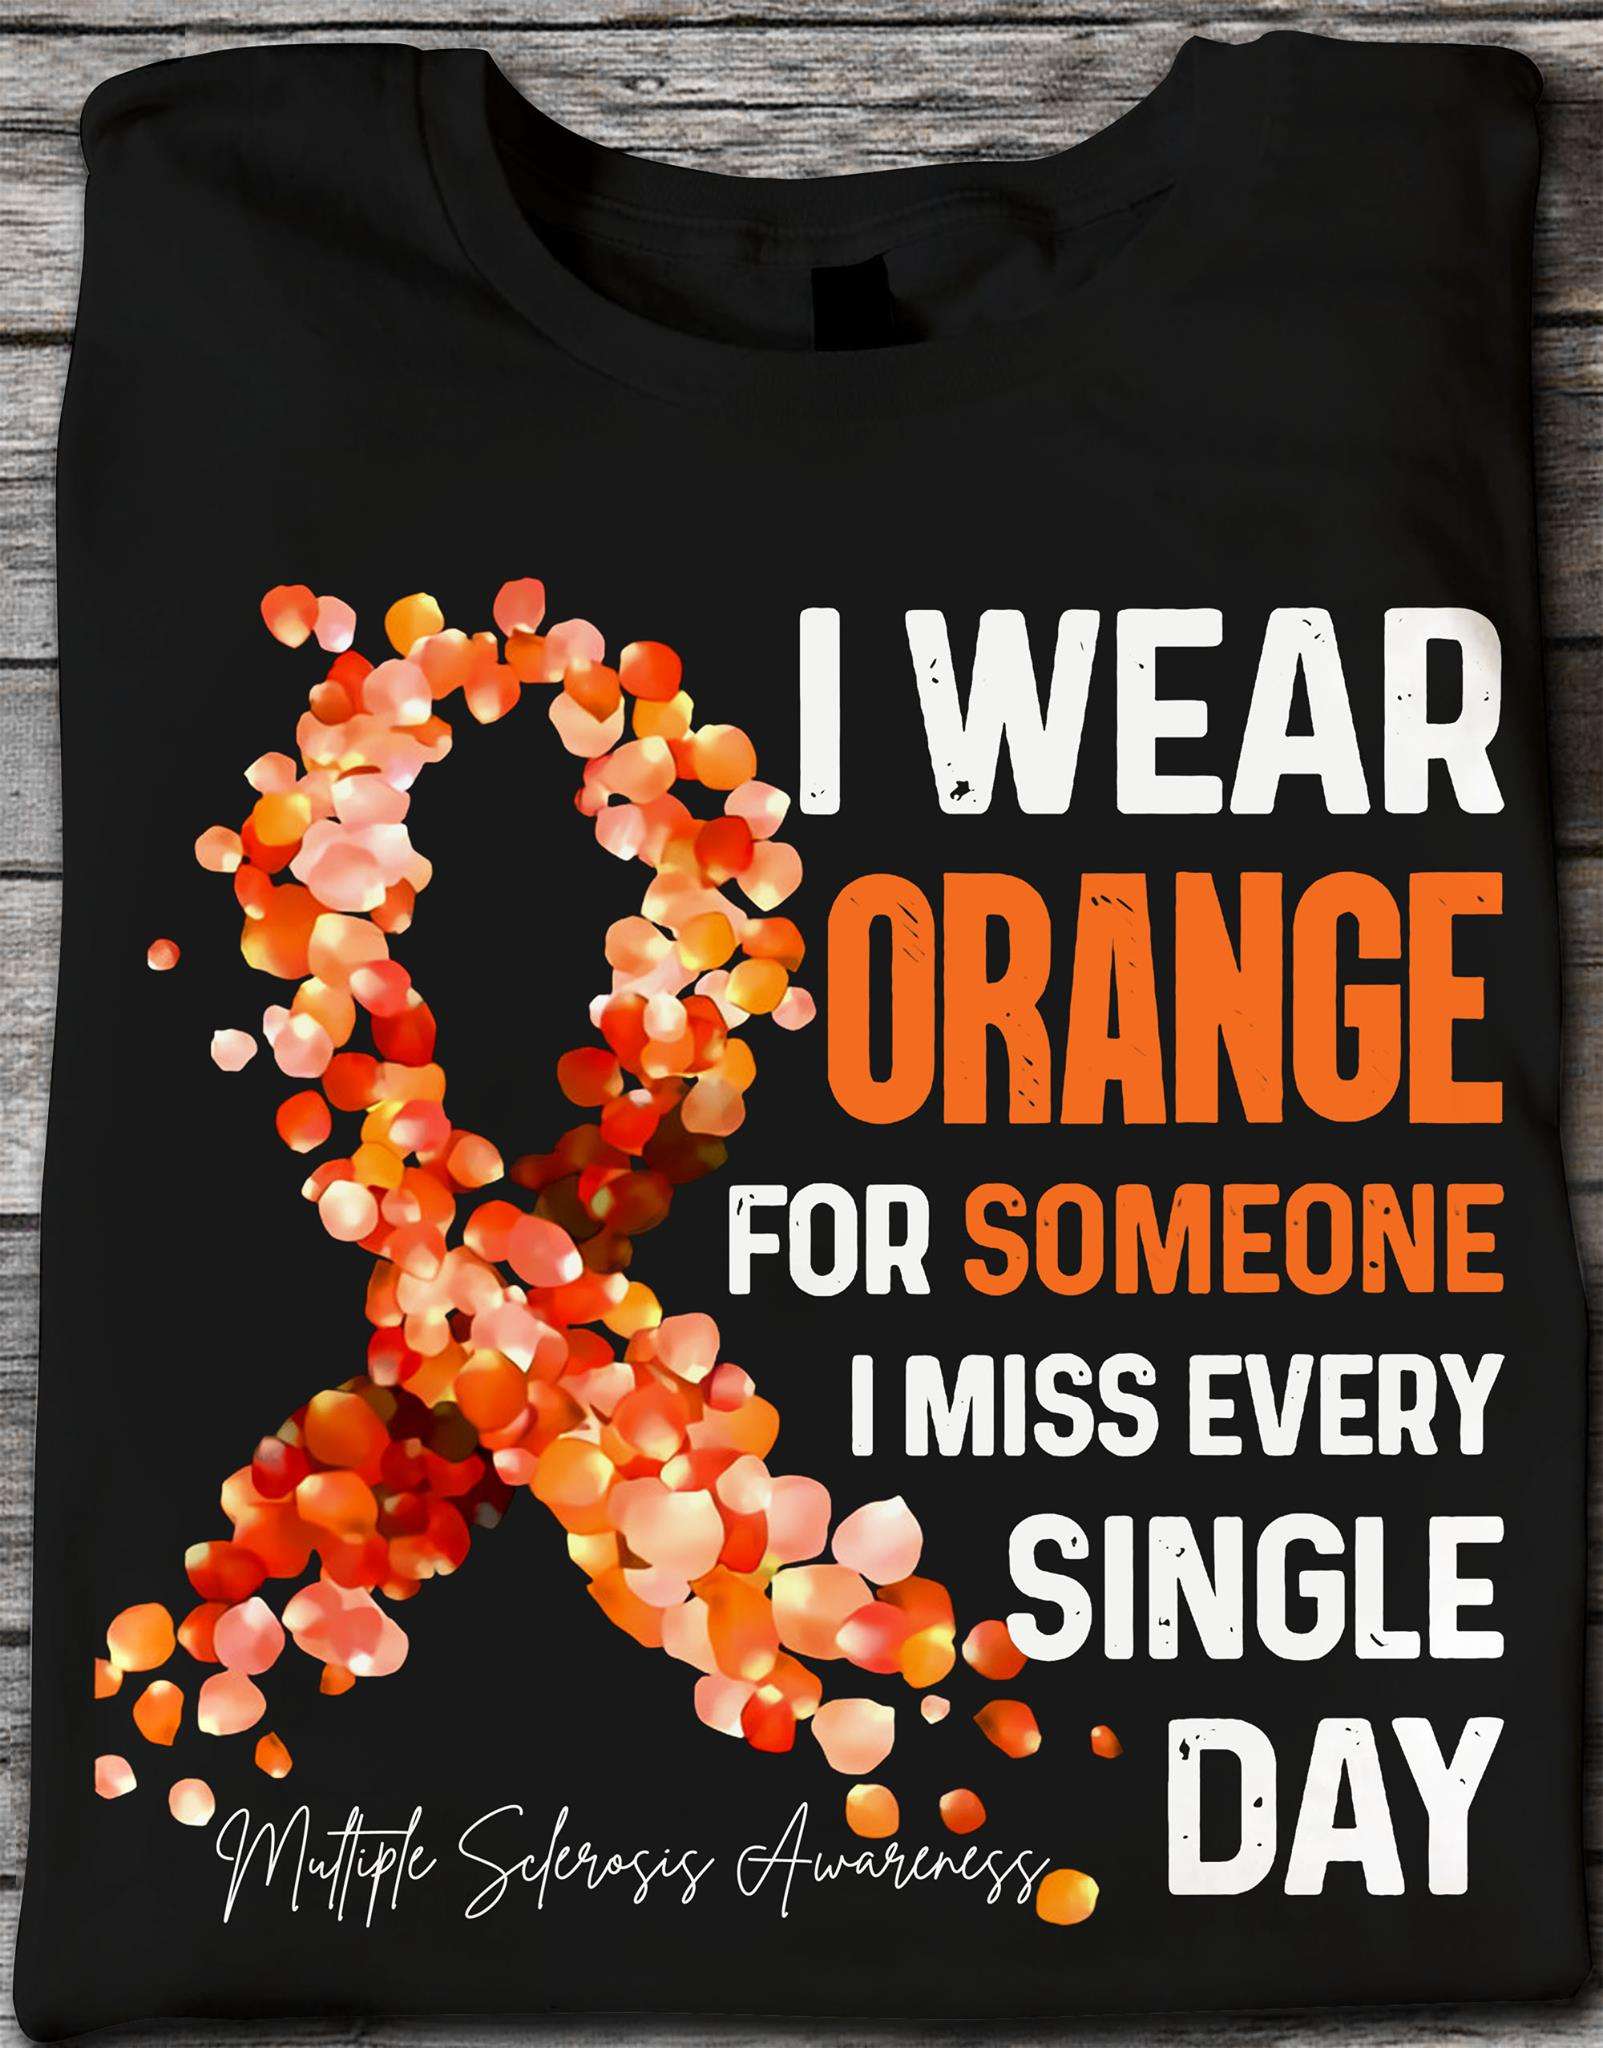 I wear orange for someone I miss every single day - Multiple sclerosis awareness